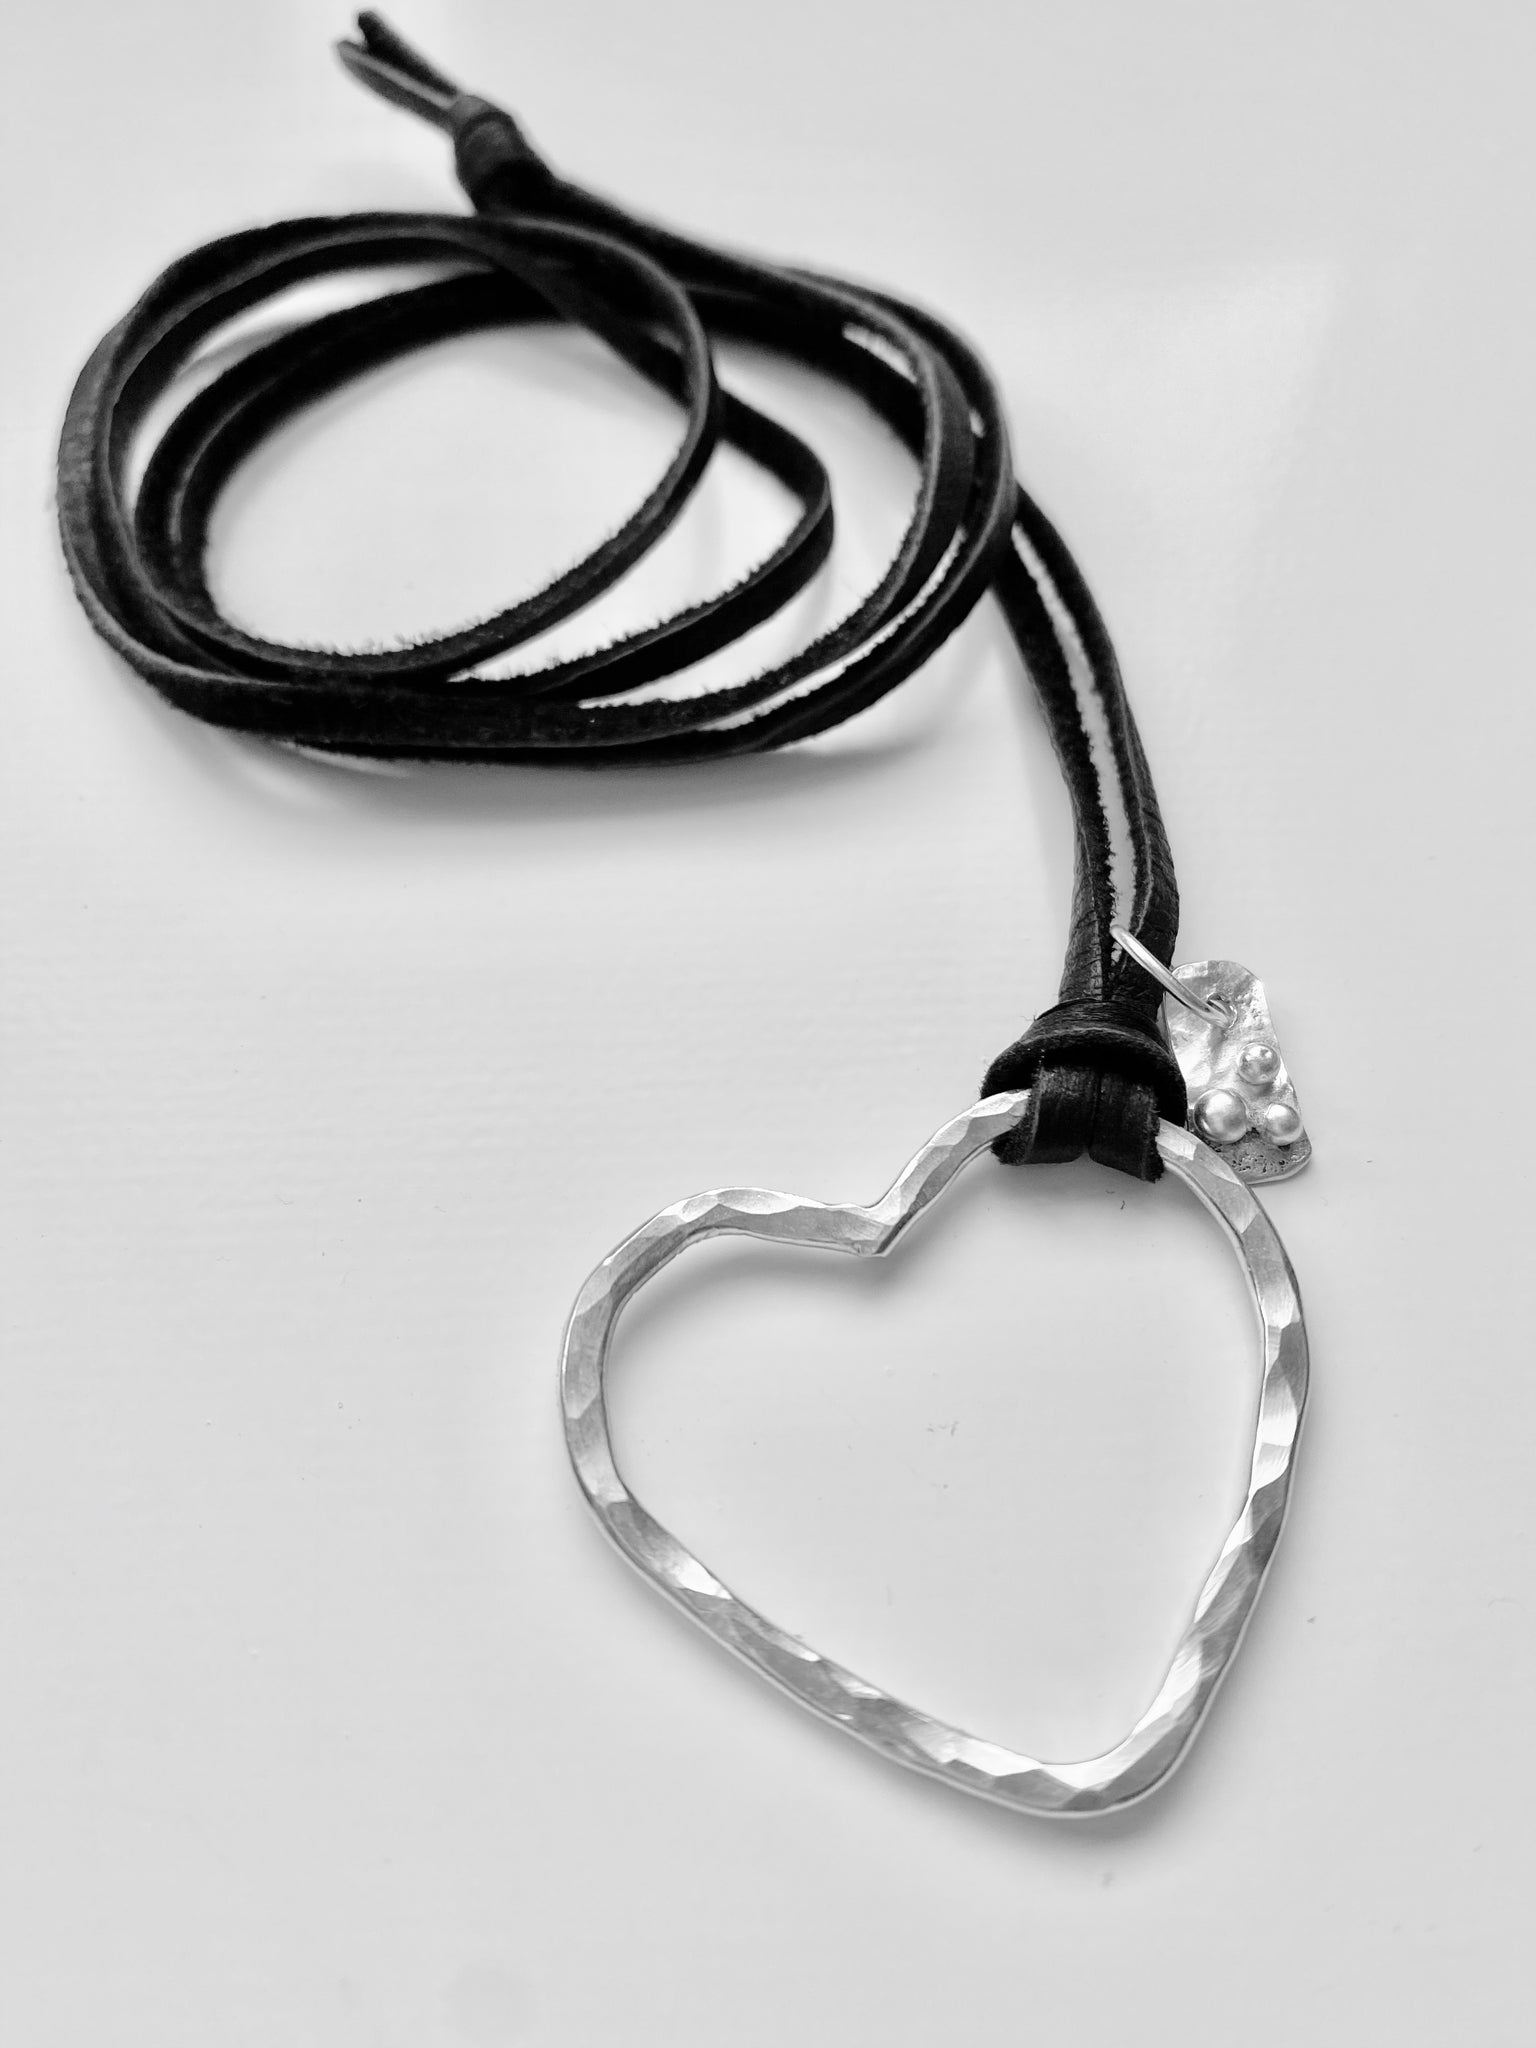 Buy Peora Double Ring Pendant Leather Cord Online At Best Price @ Tata CLiQ